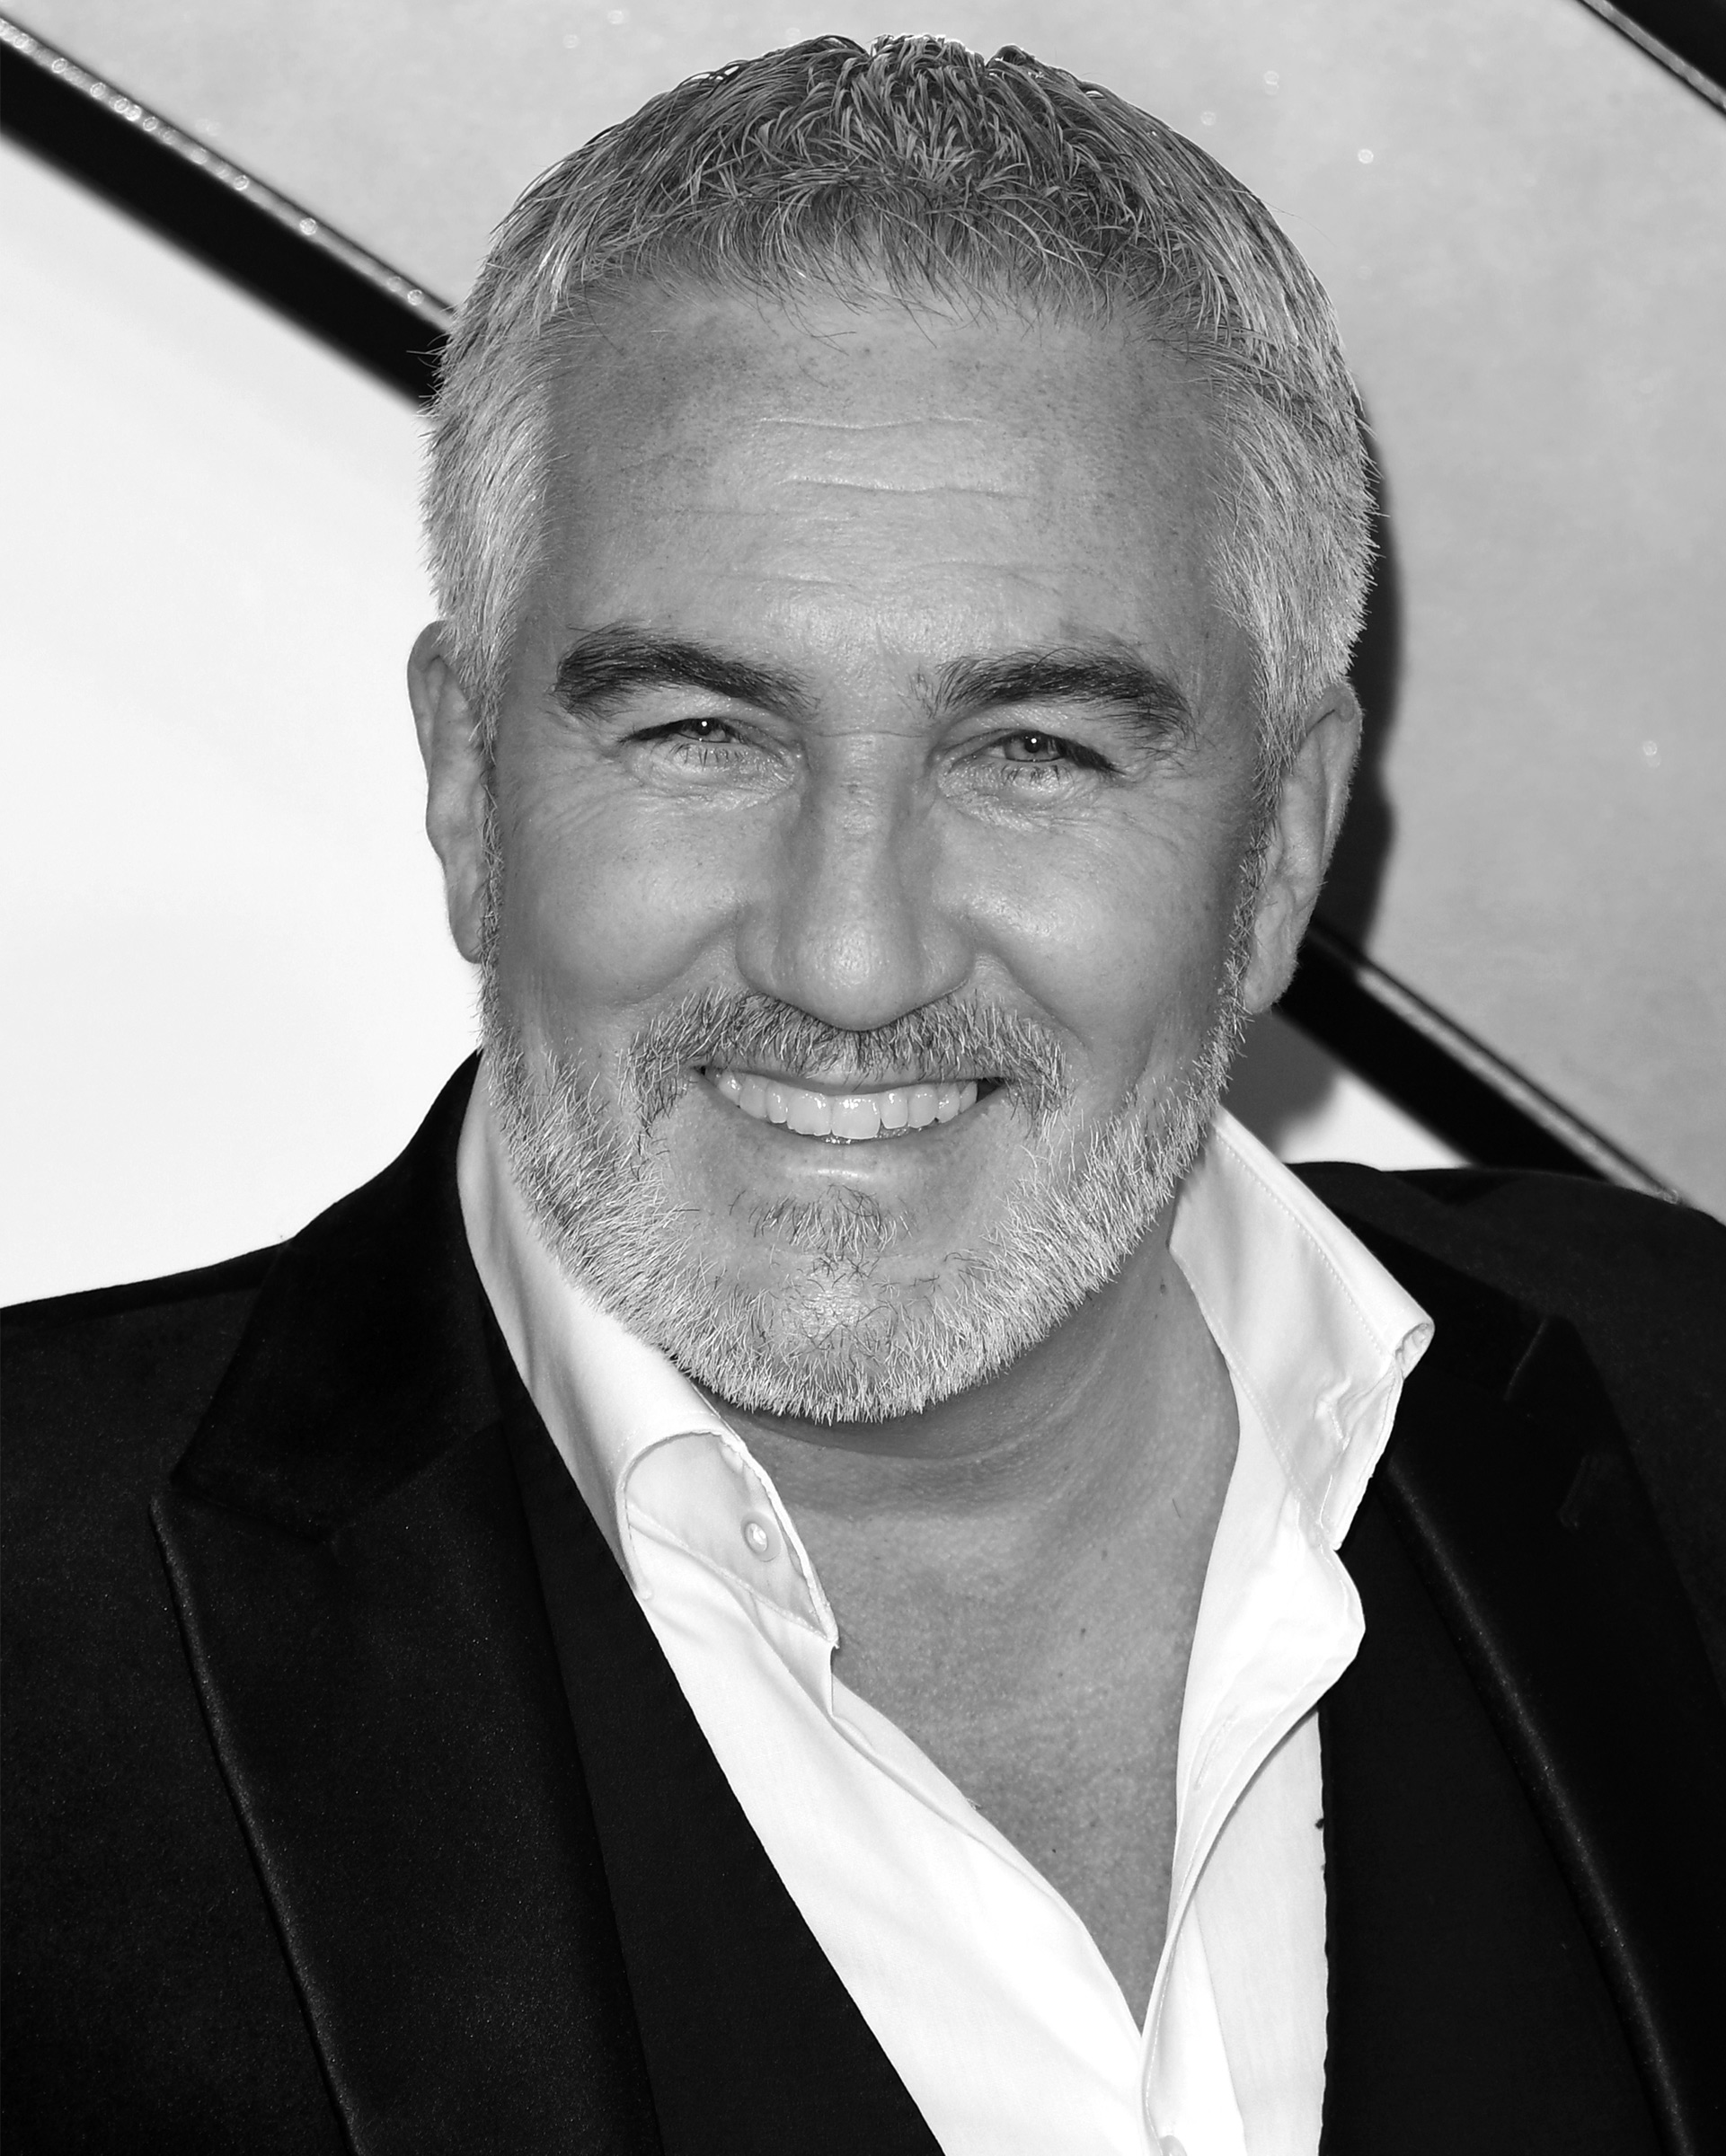 Paul Hollywood attends the World Premiere of "The King's Man" at Cineworld Leicester Square on December 06, 2021 in London, England. (Stuart C. Wilson—Getty Images)